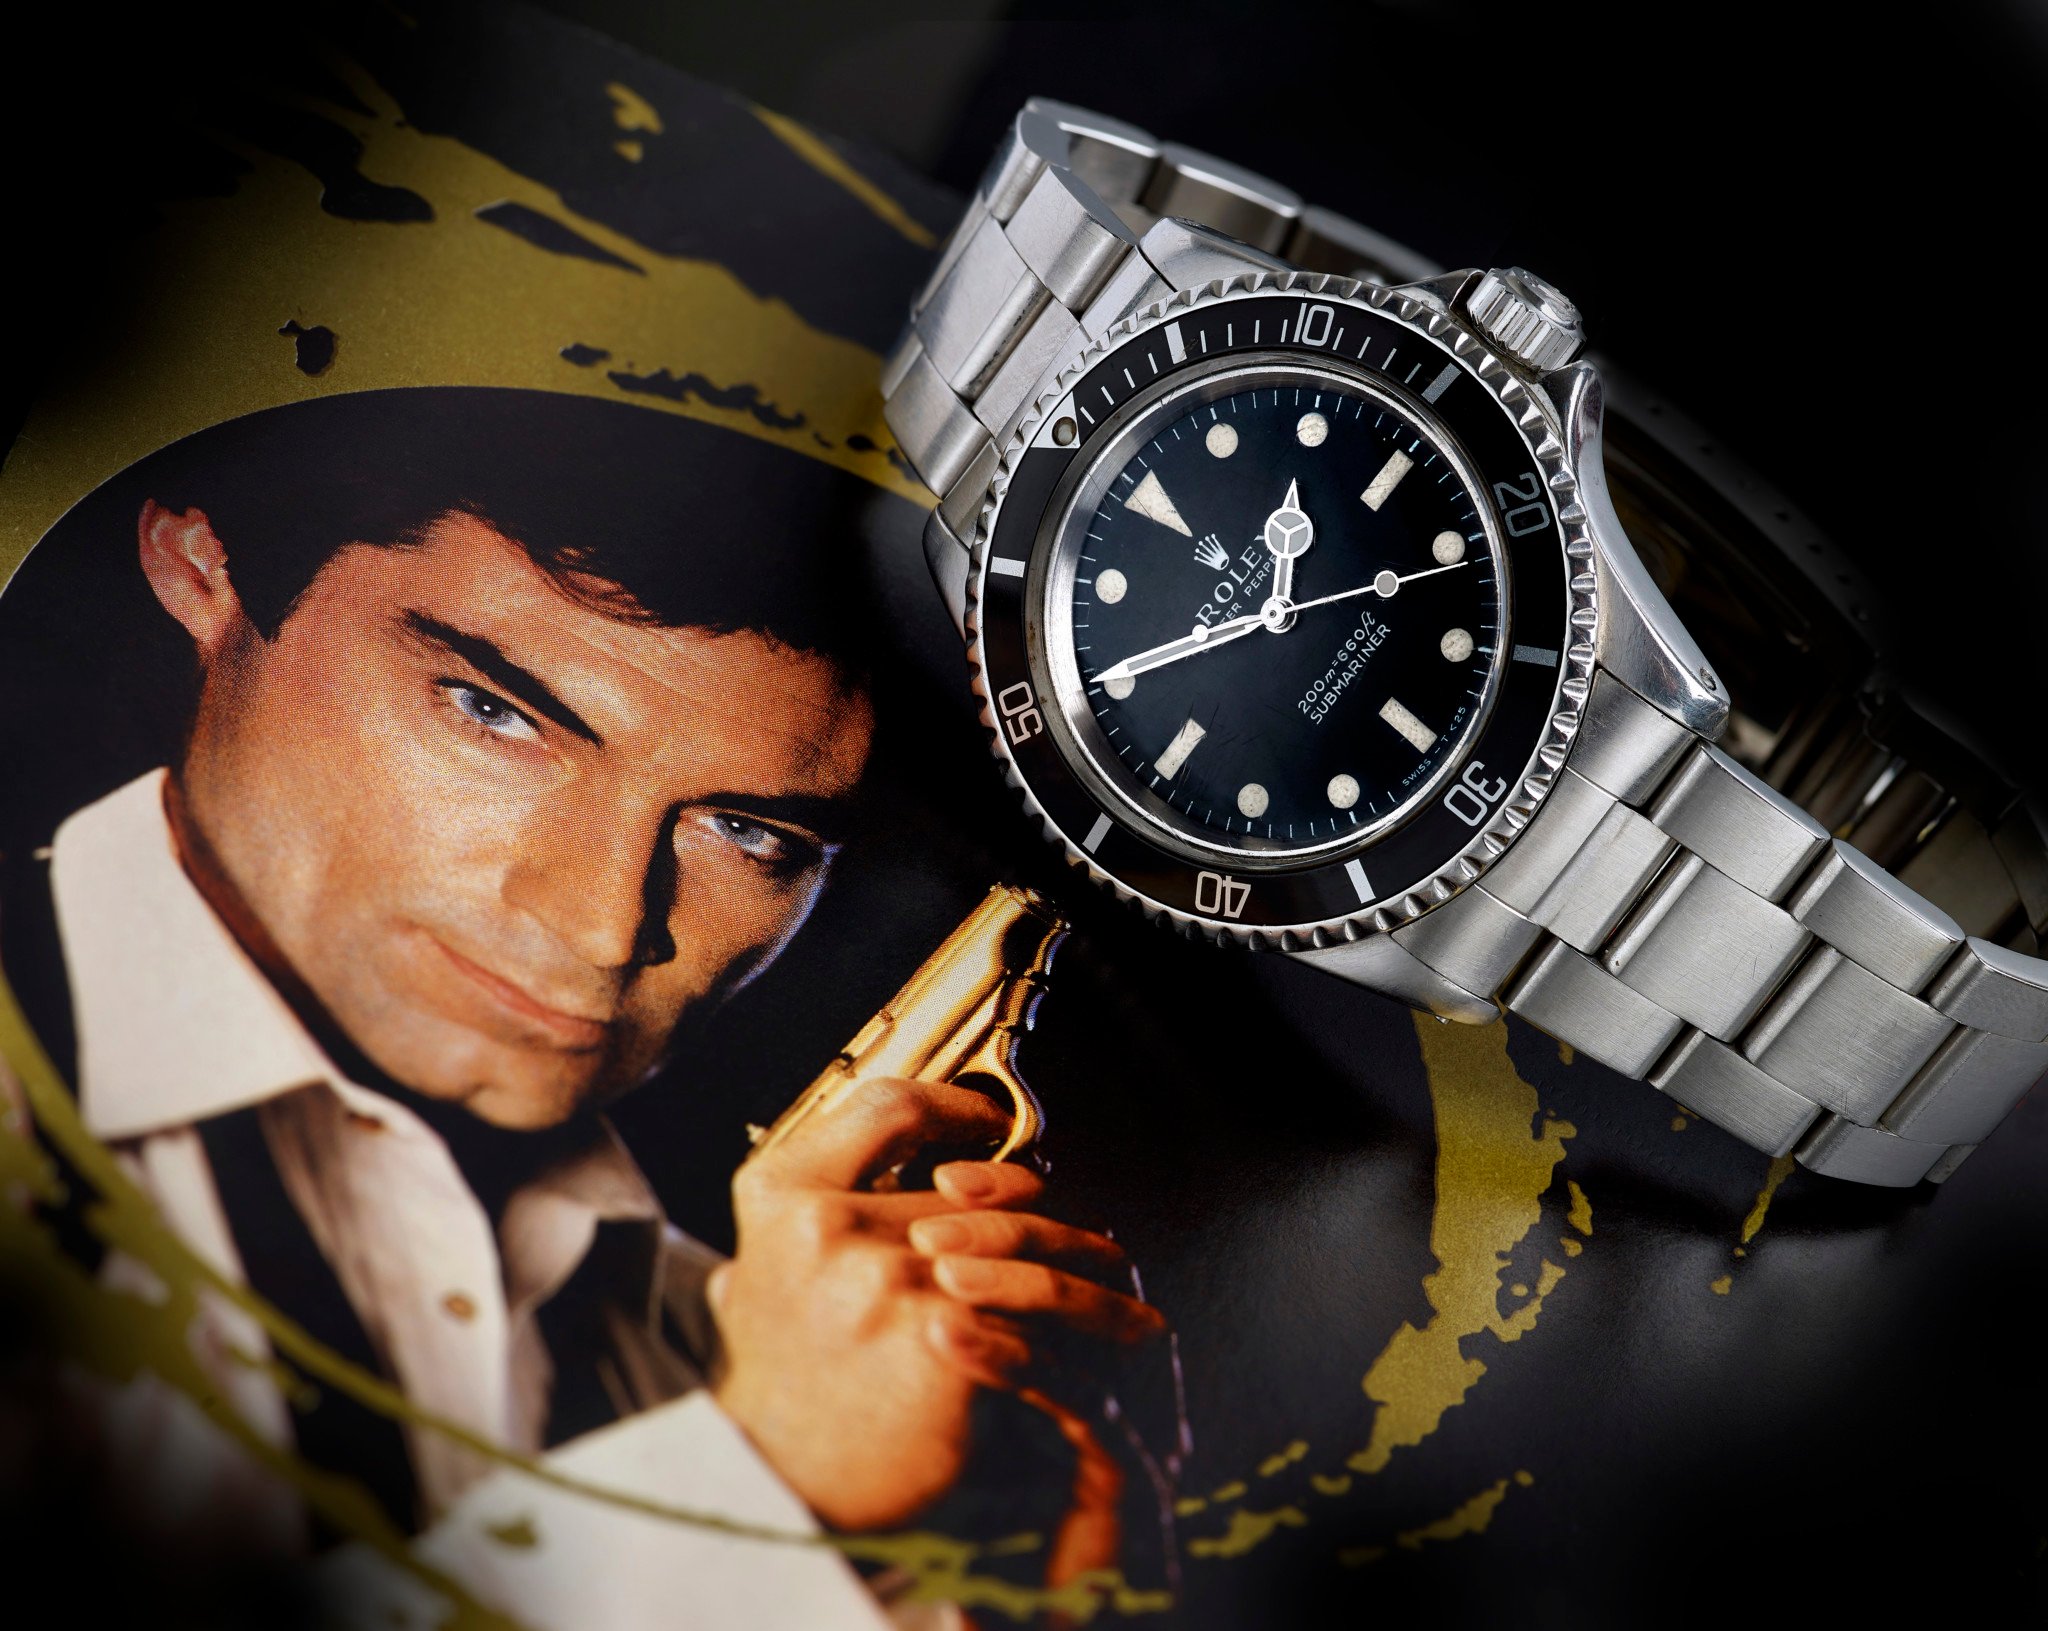 Bond Watch: License To Kill Rolex Submariner Up For Auction